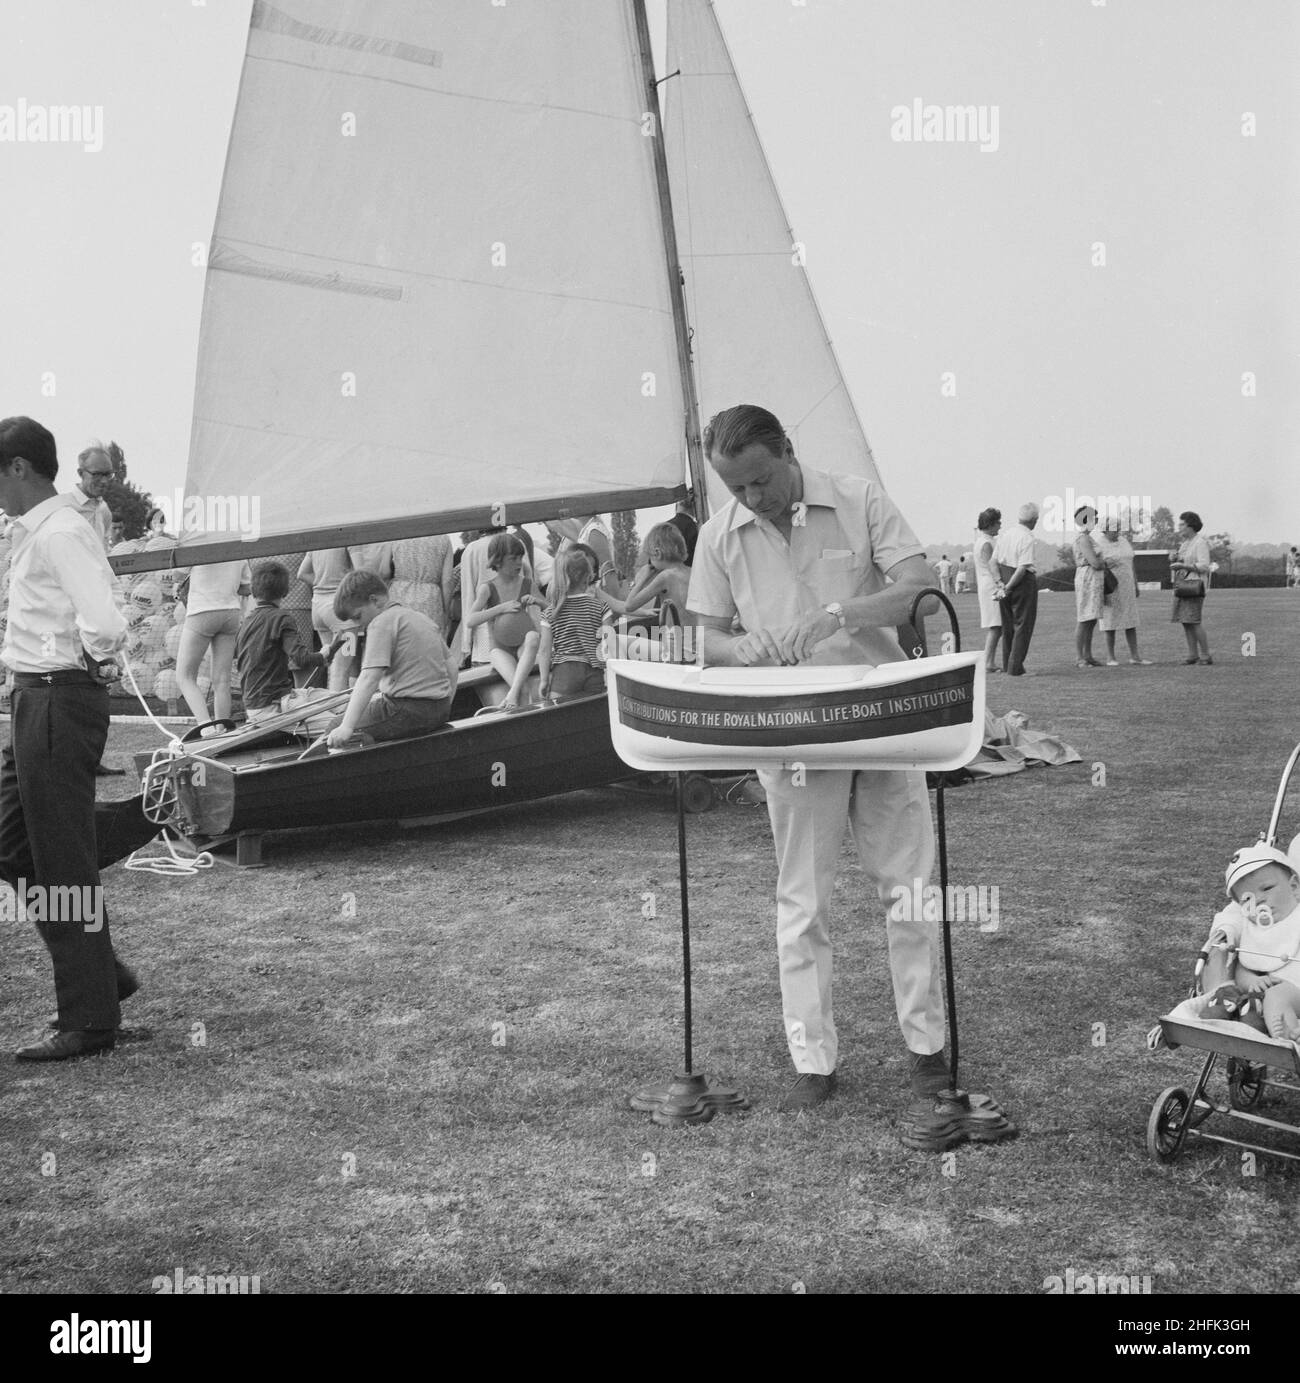 Laing Sports Ground, Rowley Lane, Elstree, Barnet, London, 14/06/1969. A man with a RNLI lifeboat collection box at the Laing Sports Ground, with children in the background sitting in a boat on the grass. A Gala Day was held by Laing at the Laing Sports Ground on 14th June 1969, as a replacement of the annual Sports Day. Sports events were held by the Sports Club, which included hockey, tennis, bowls, and football tournaments. A traditional English fete programme featured coconut shies, bingo, pony rides, catering and a beer tent, candy floss, and roundabouts. The day ended with a beauty conte Stock Photo